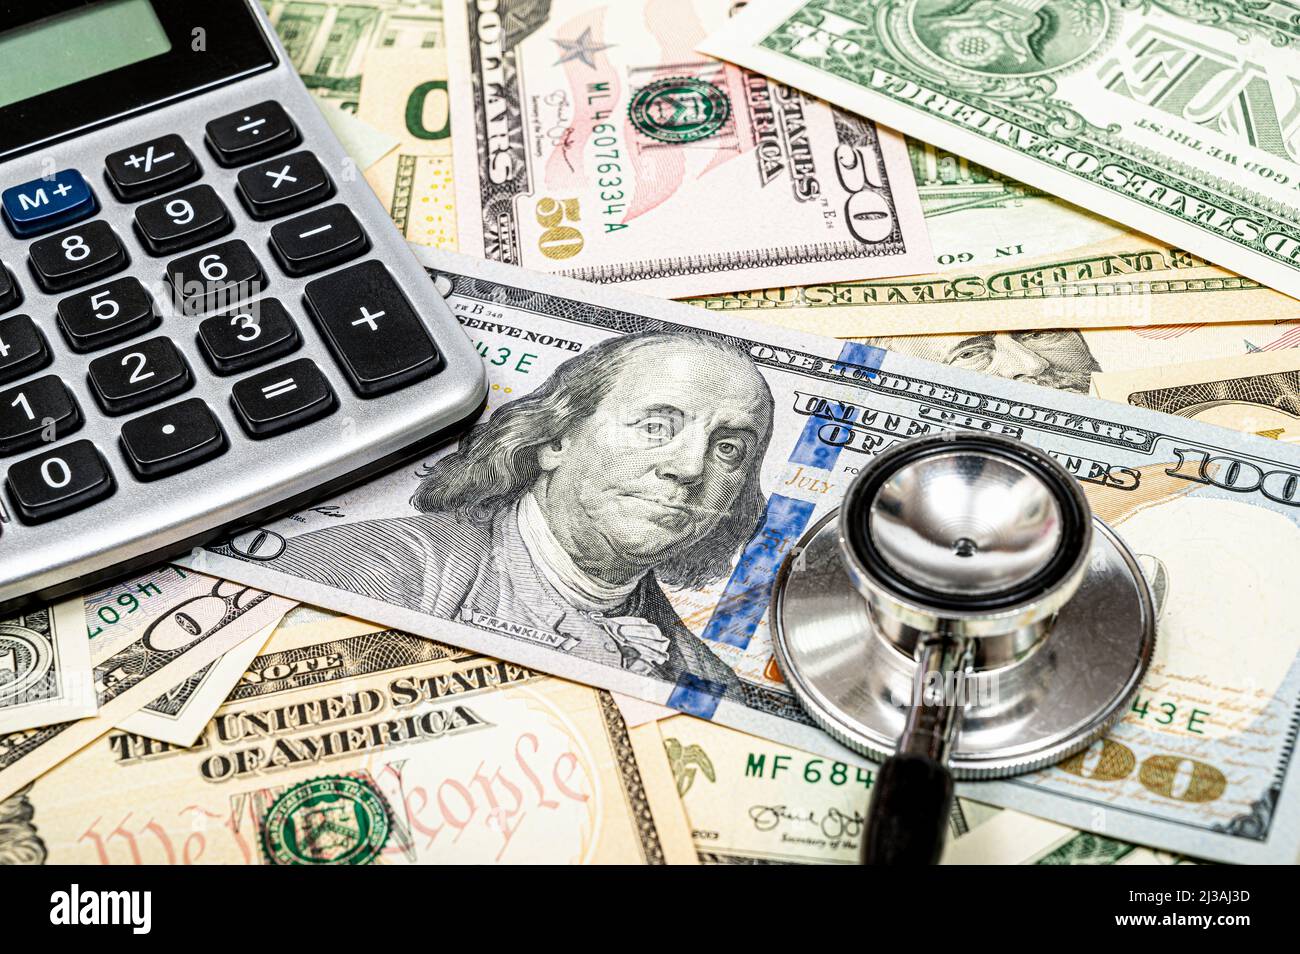 Medical expenses concept with american currency, calculator and stethoscope Stock Photo